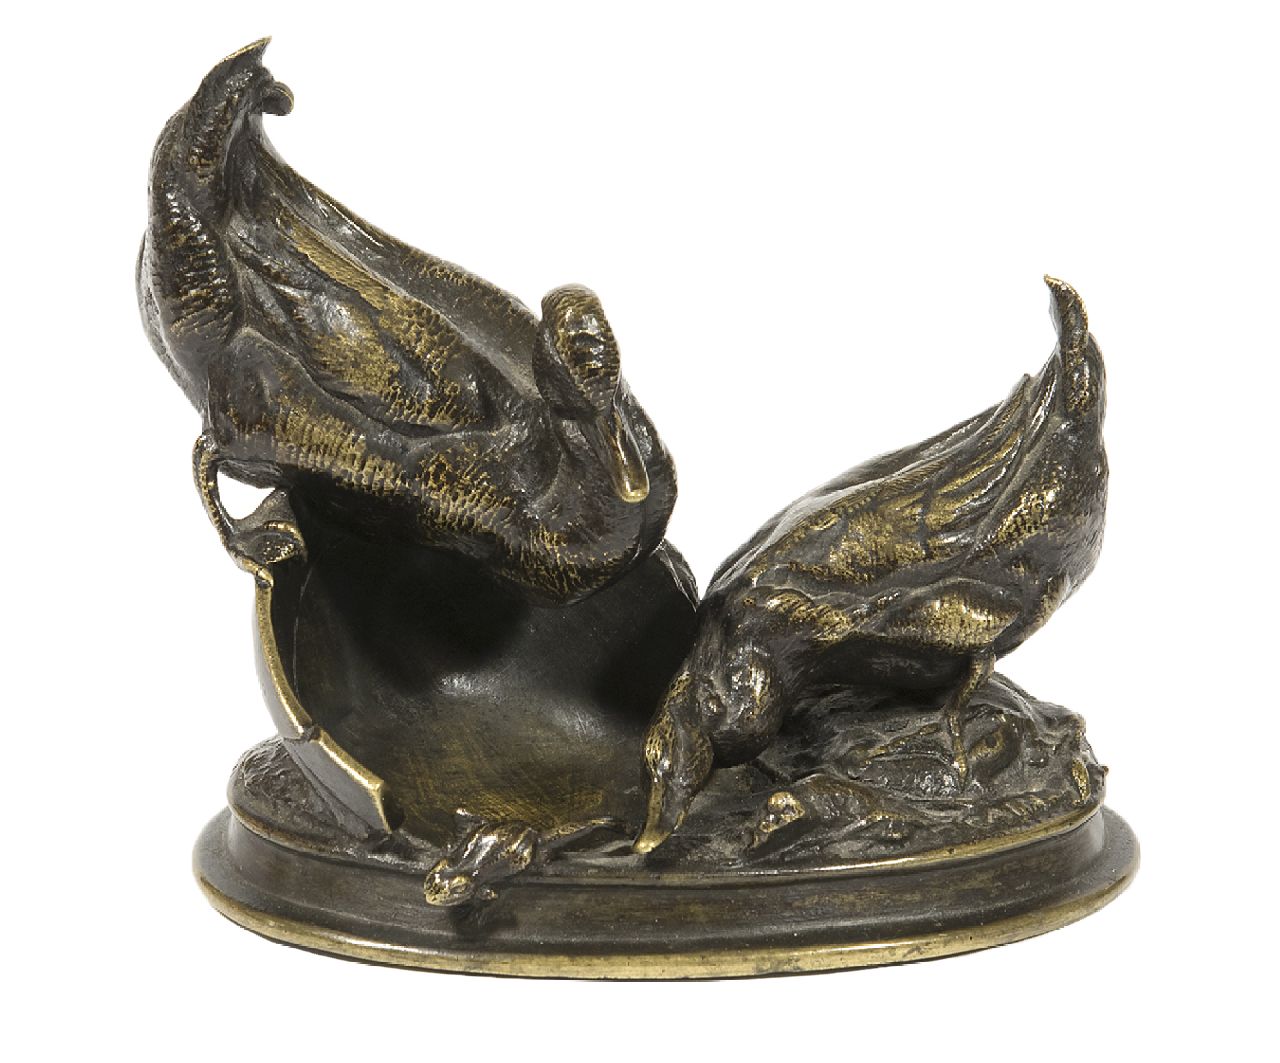 Cain A.N.  | Auguste-Nicolas Cain | Sculptures and objects offered for sale | Duck couple with their offspring, bronze 9.9 x 11.0 cm